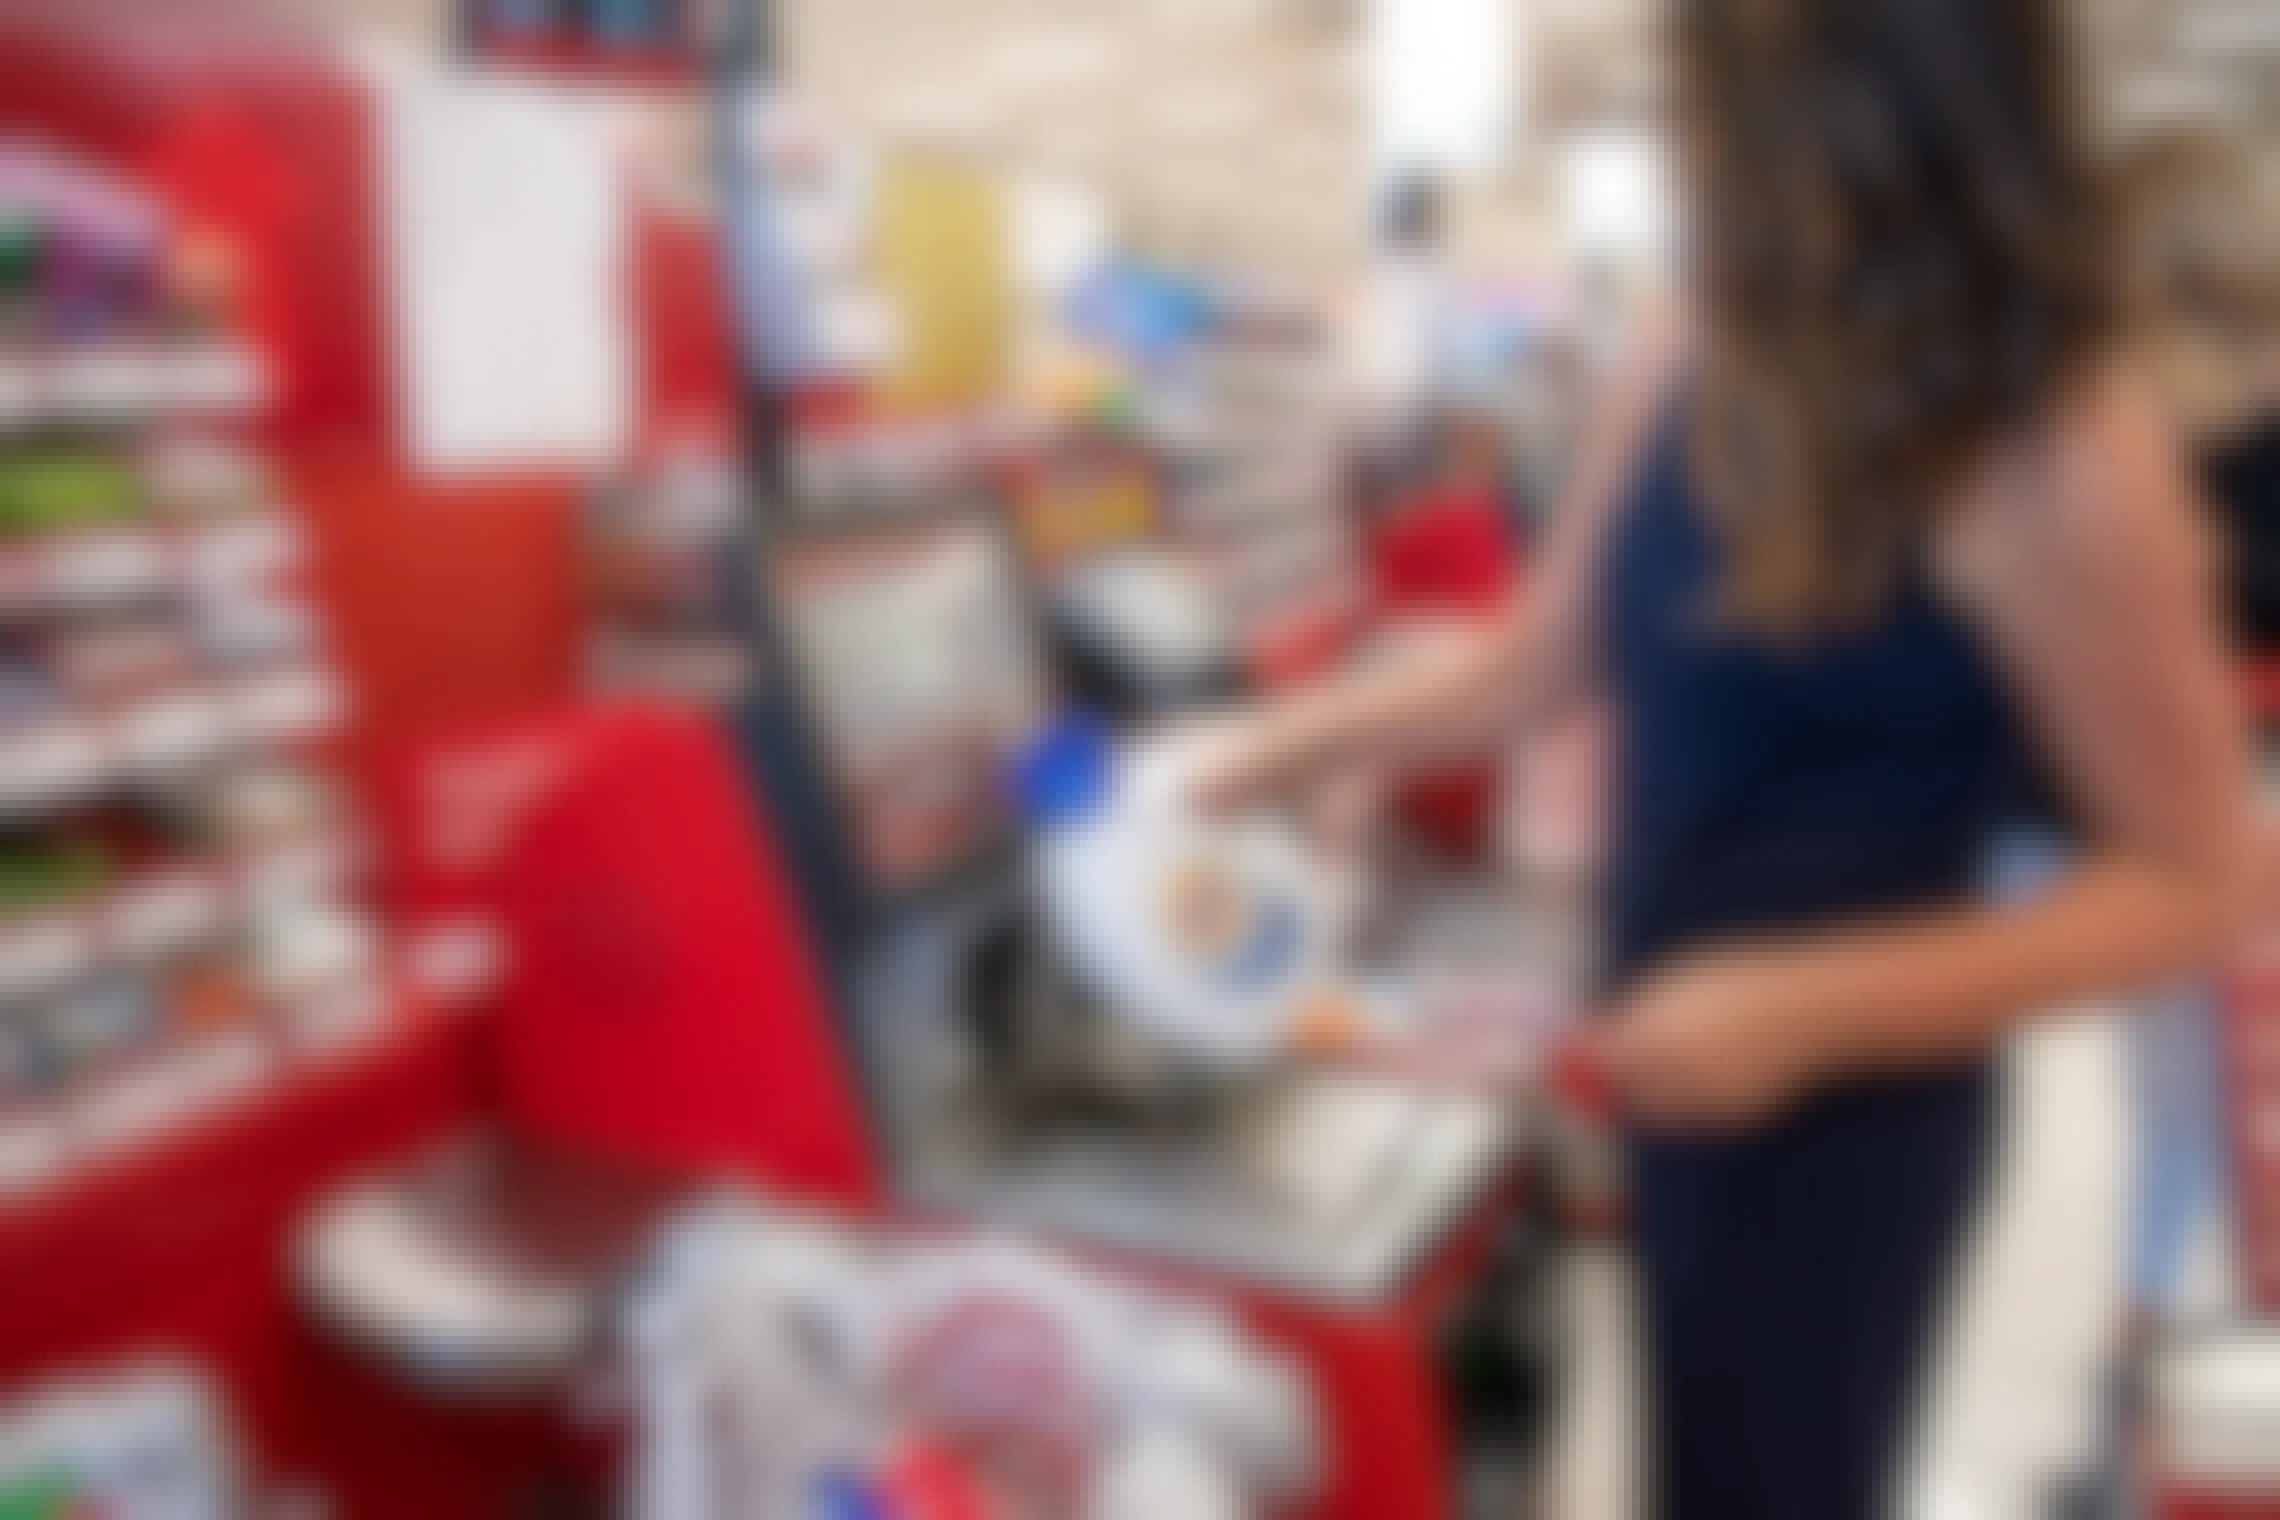 A woman scanning a bottle of laundry detergent at the Target self-checkout kiosk.